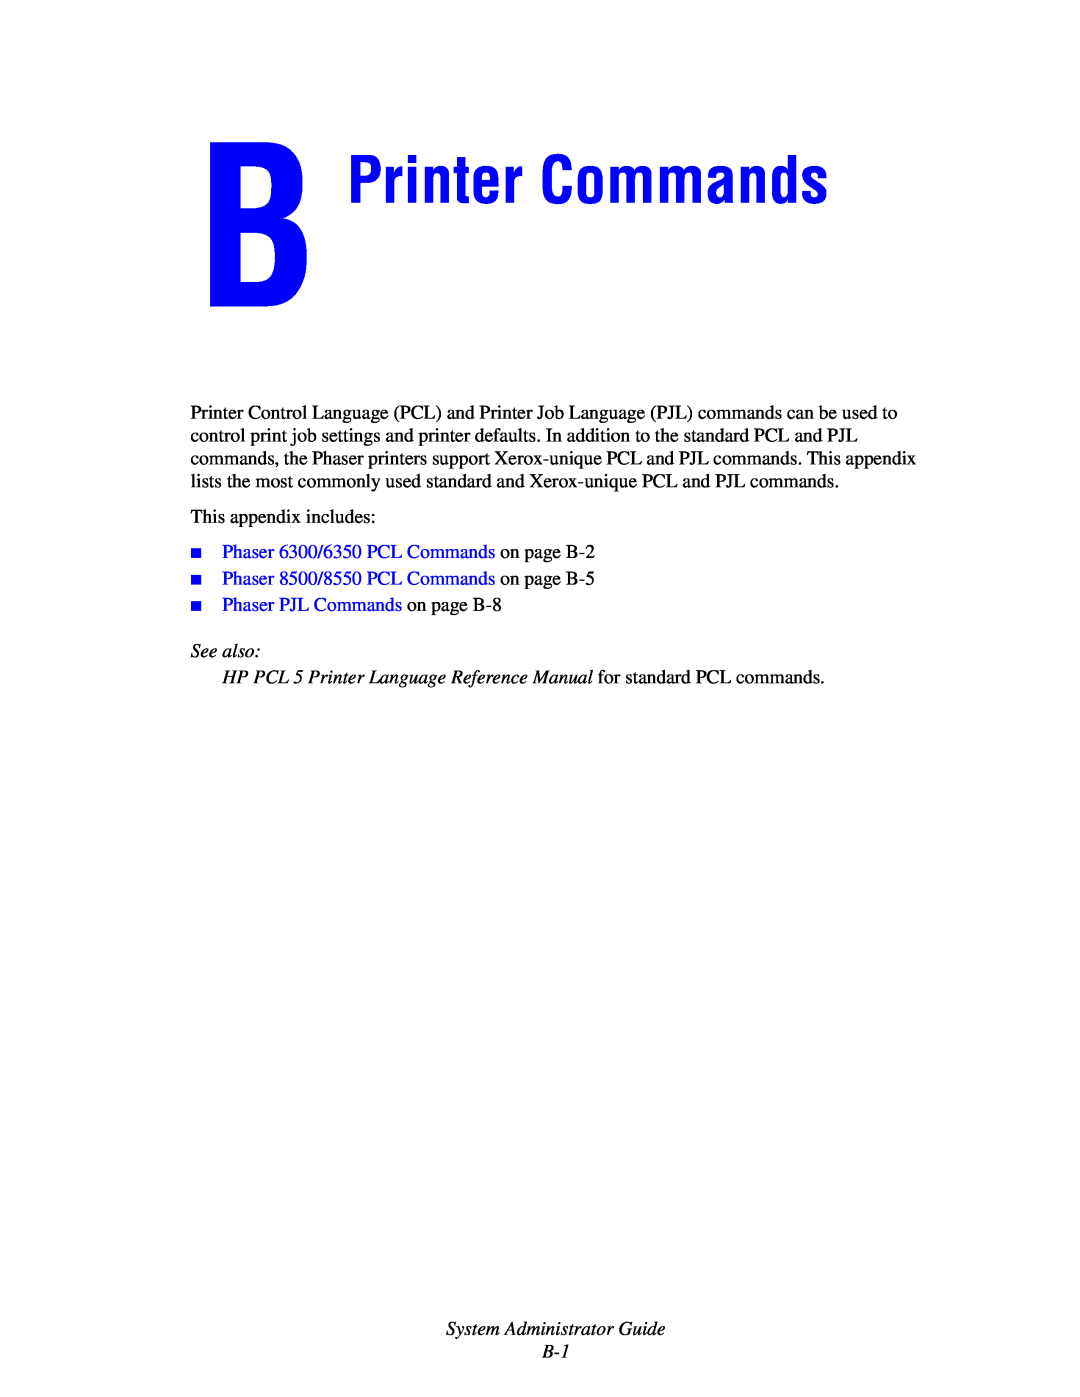 Xerox 6300, 6350, 8500, 8550 Printer Commands, Phaser 6300/6350 PCL Commands on page B-2, Phaser PJL Commands on page B-8 